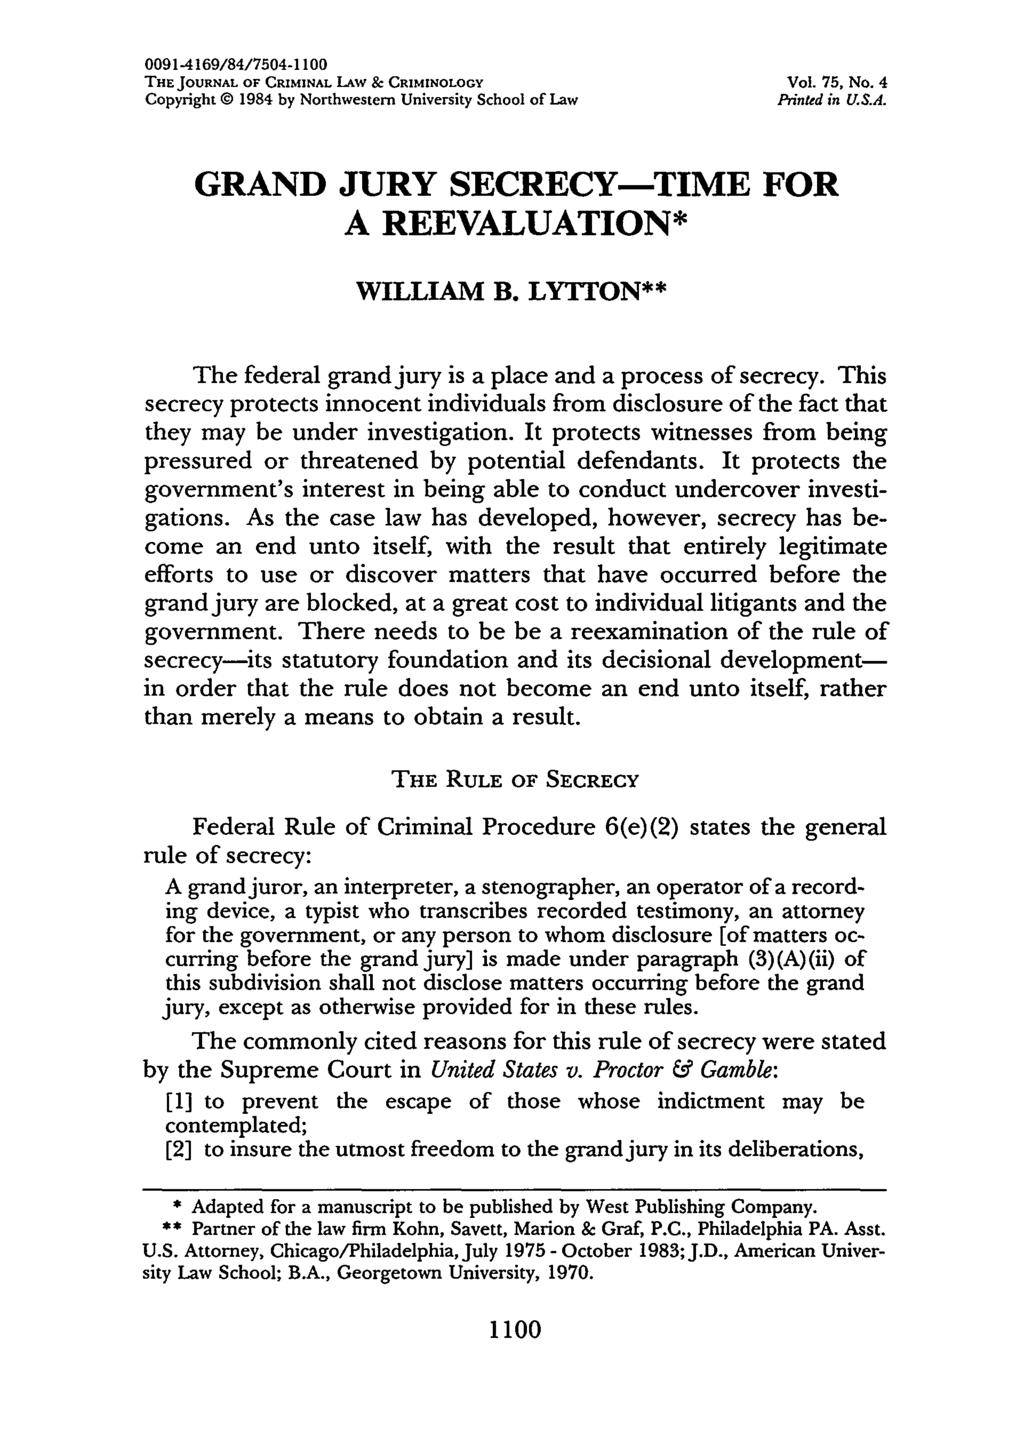 0091-4169/84/7504-1100 THE JOURNAL OF CRIMINAL LAW & CRIMINOLOGY Vol. 75, No. 4 Copyright @ 1984 by Northwestern University School of Law Printed in U.S.A. GRAND JURY SECRECY-TIME FOR A REEVALUATION* WILLIAM B.